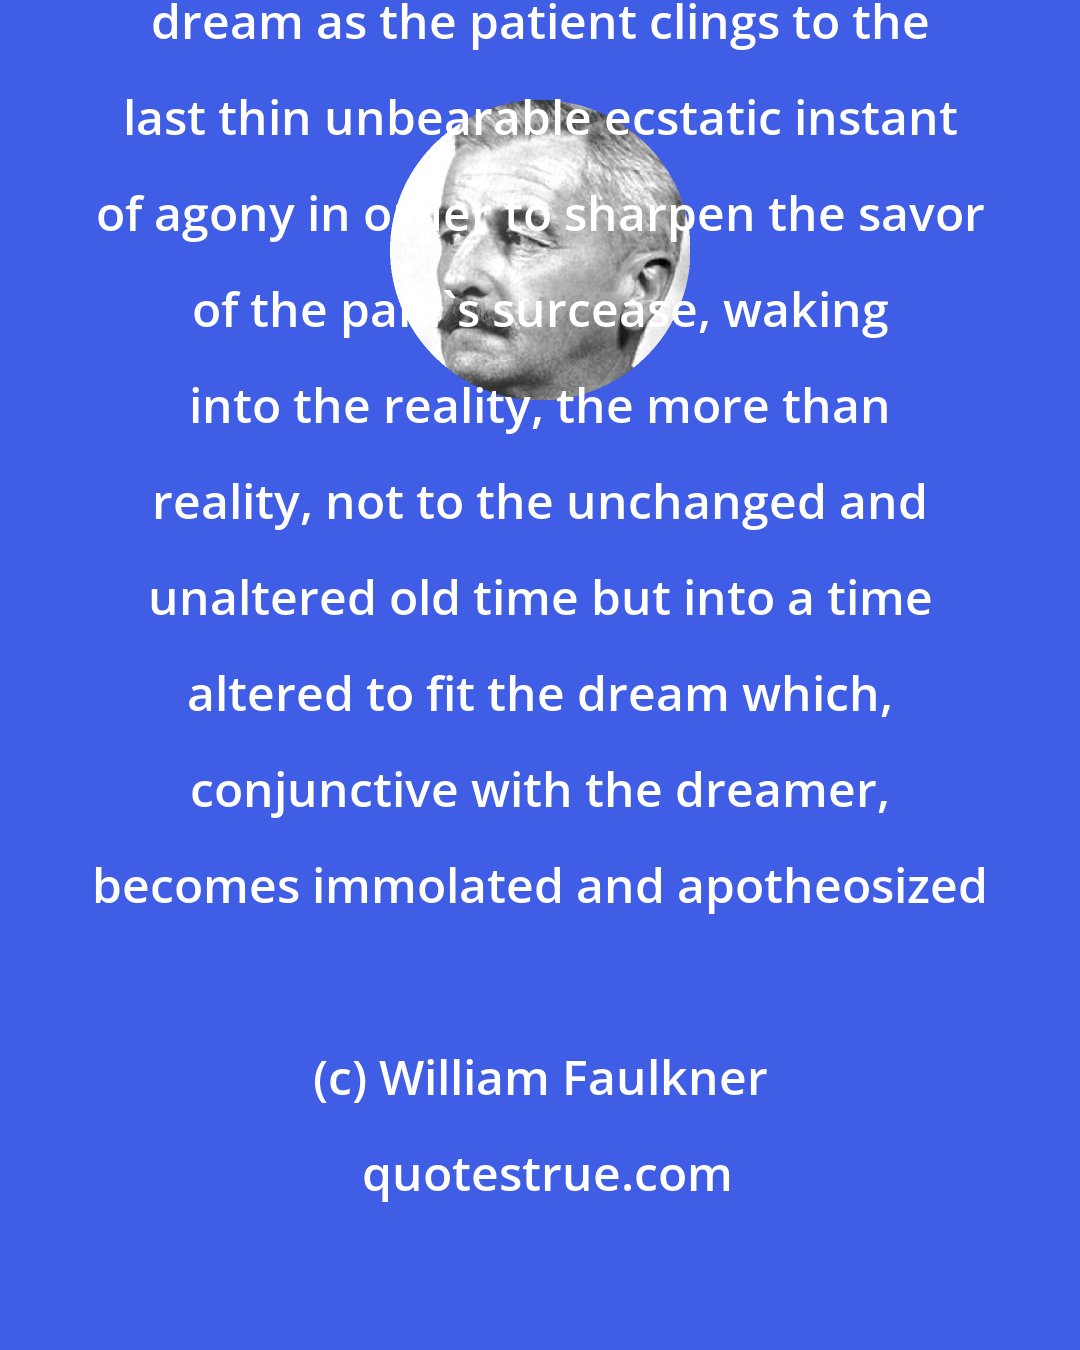 William Faulkner: I, the dreamer clinging yet to the dream as the patient clings to the last thin unbearable ecstatic instant of agony in order to sharpen the savor of the pain's surcease, waking into the reality, the more than reality, not to the unchanged and unaltered old time but into a time altered to fit the dream which, conjunctive with the dreamer, becomes immolated and apotheosized